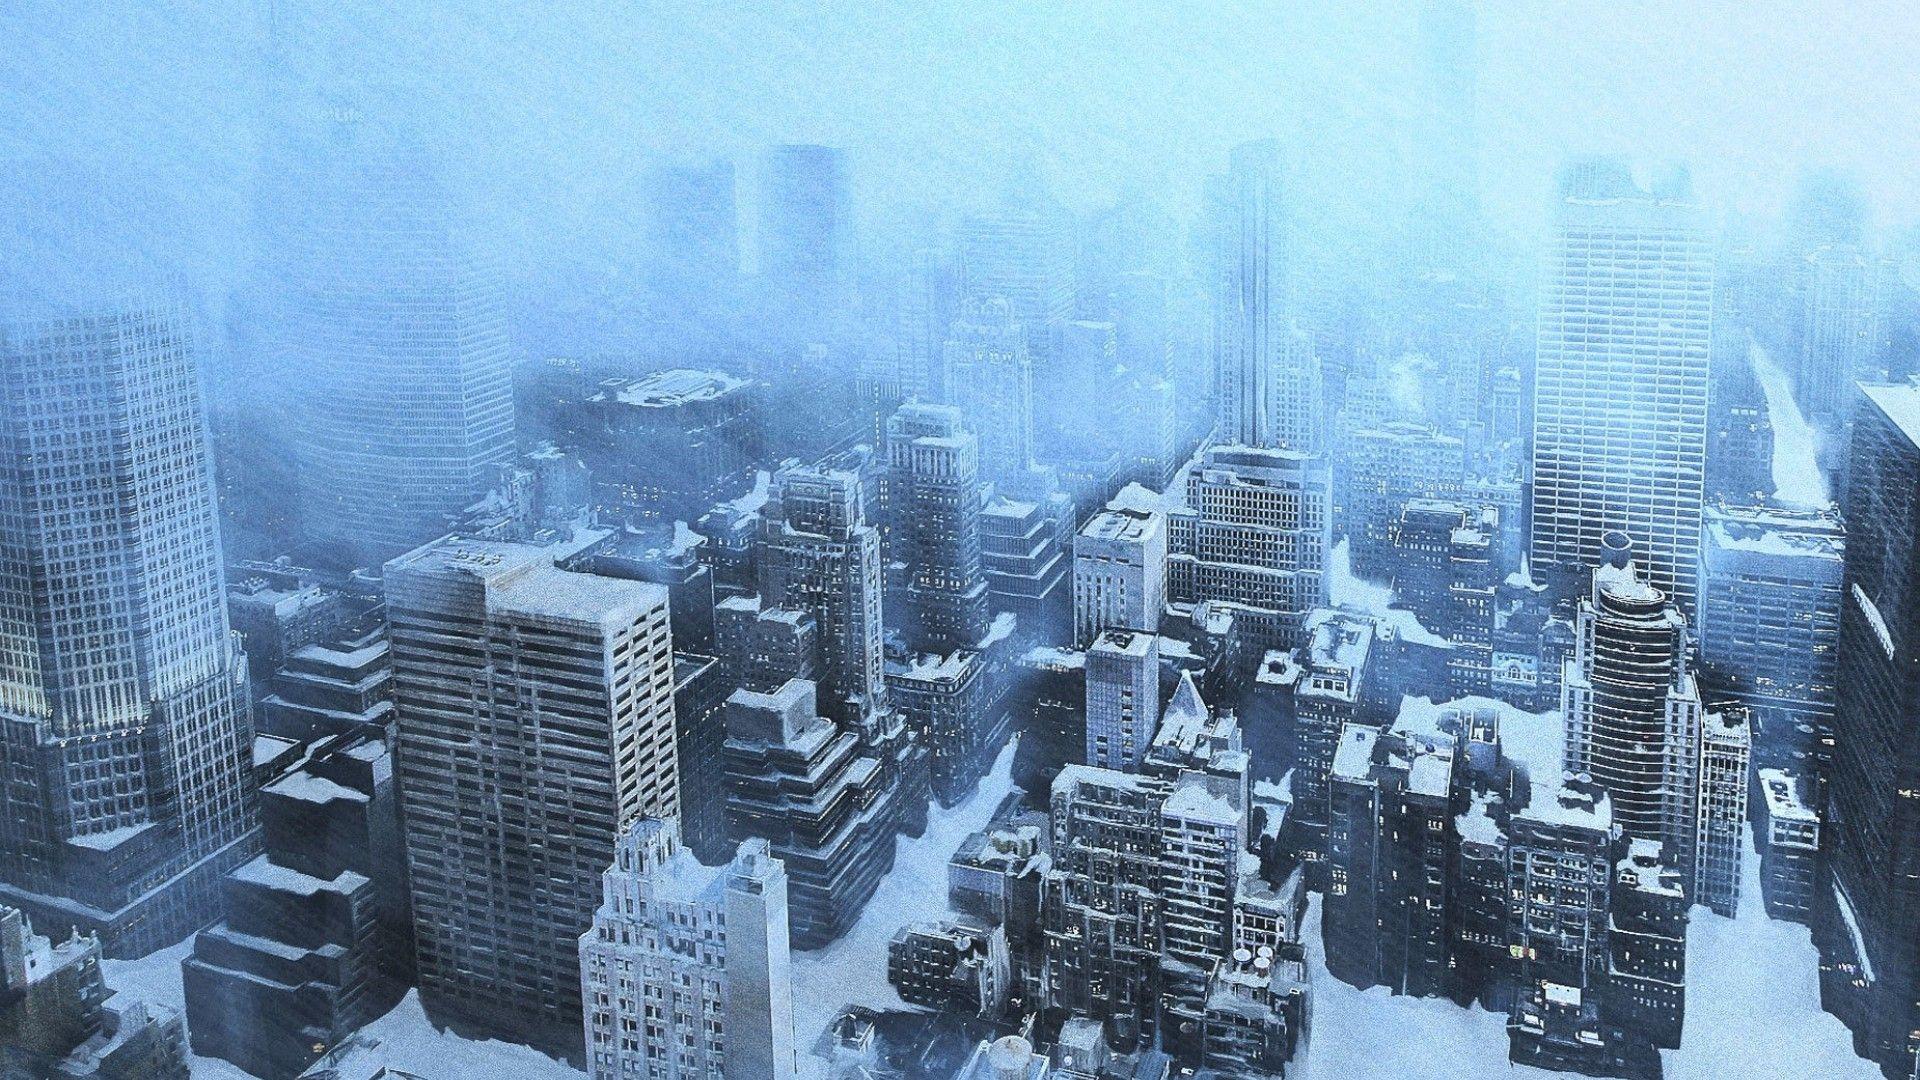 Snow falling on skyscrapers, New York City wallpaper download